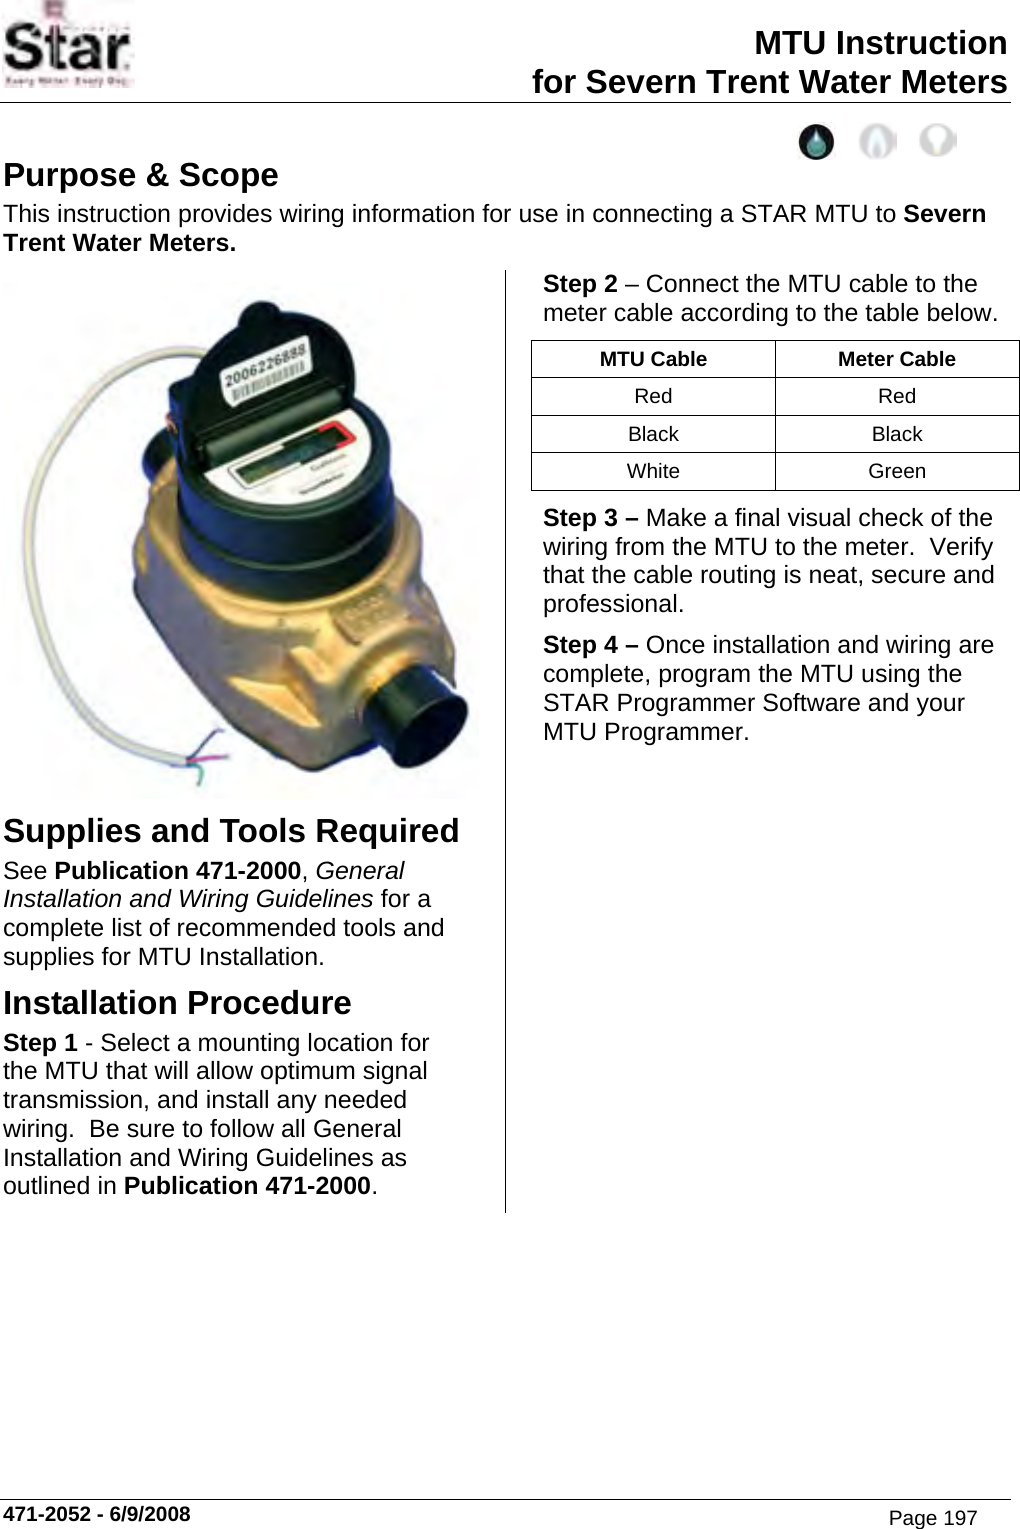 Page 197 of Aclara Technologies 09015 Transmitter for Meter Reading User Manual users manual